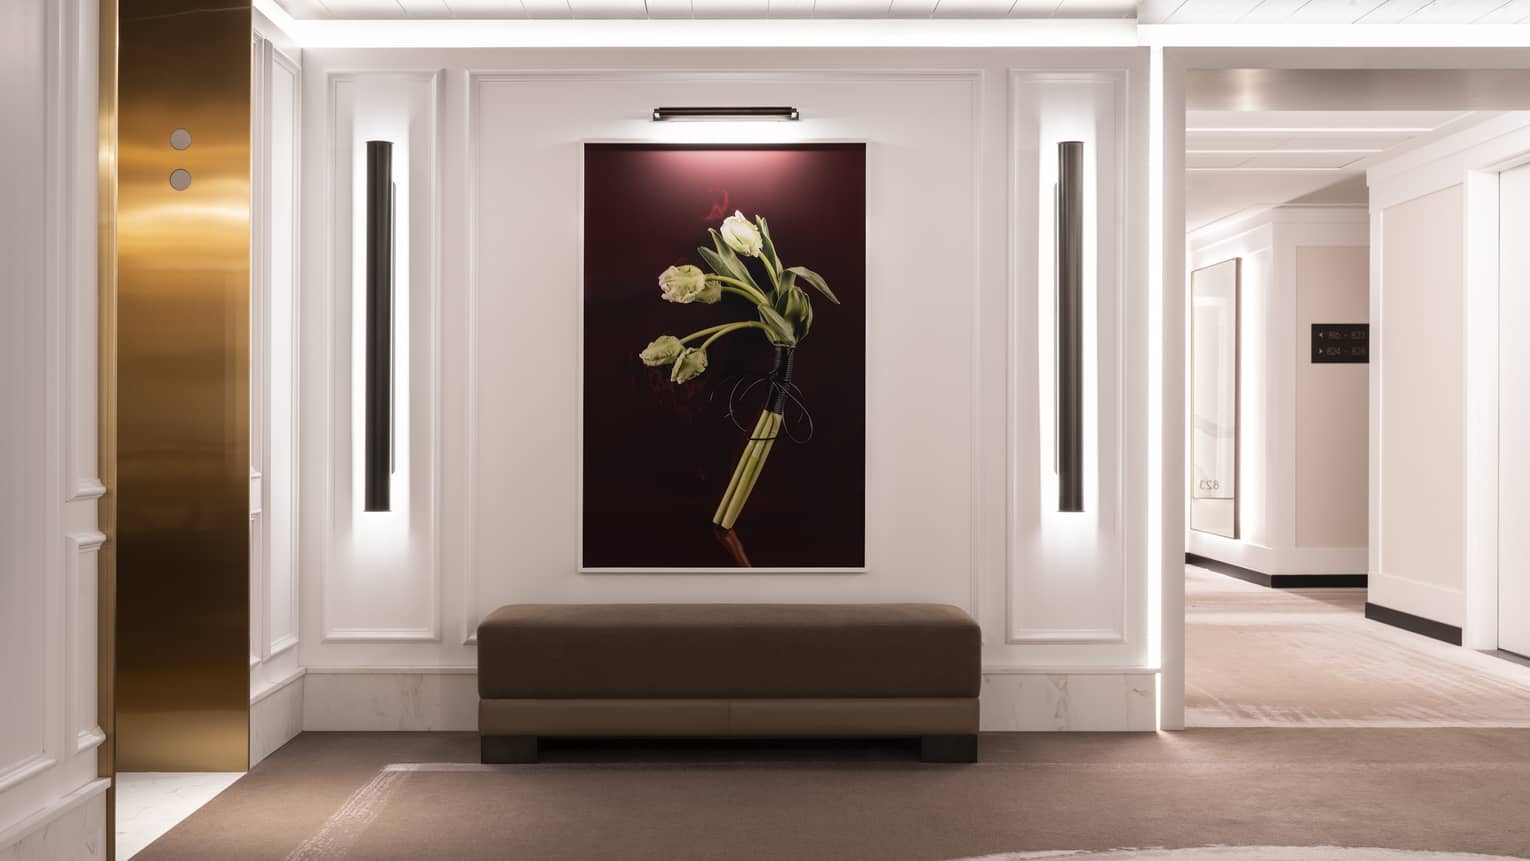 White grand foyer with over-sized painting of white flowers with purple background, below a brown sofa